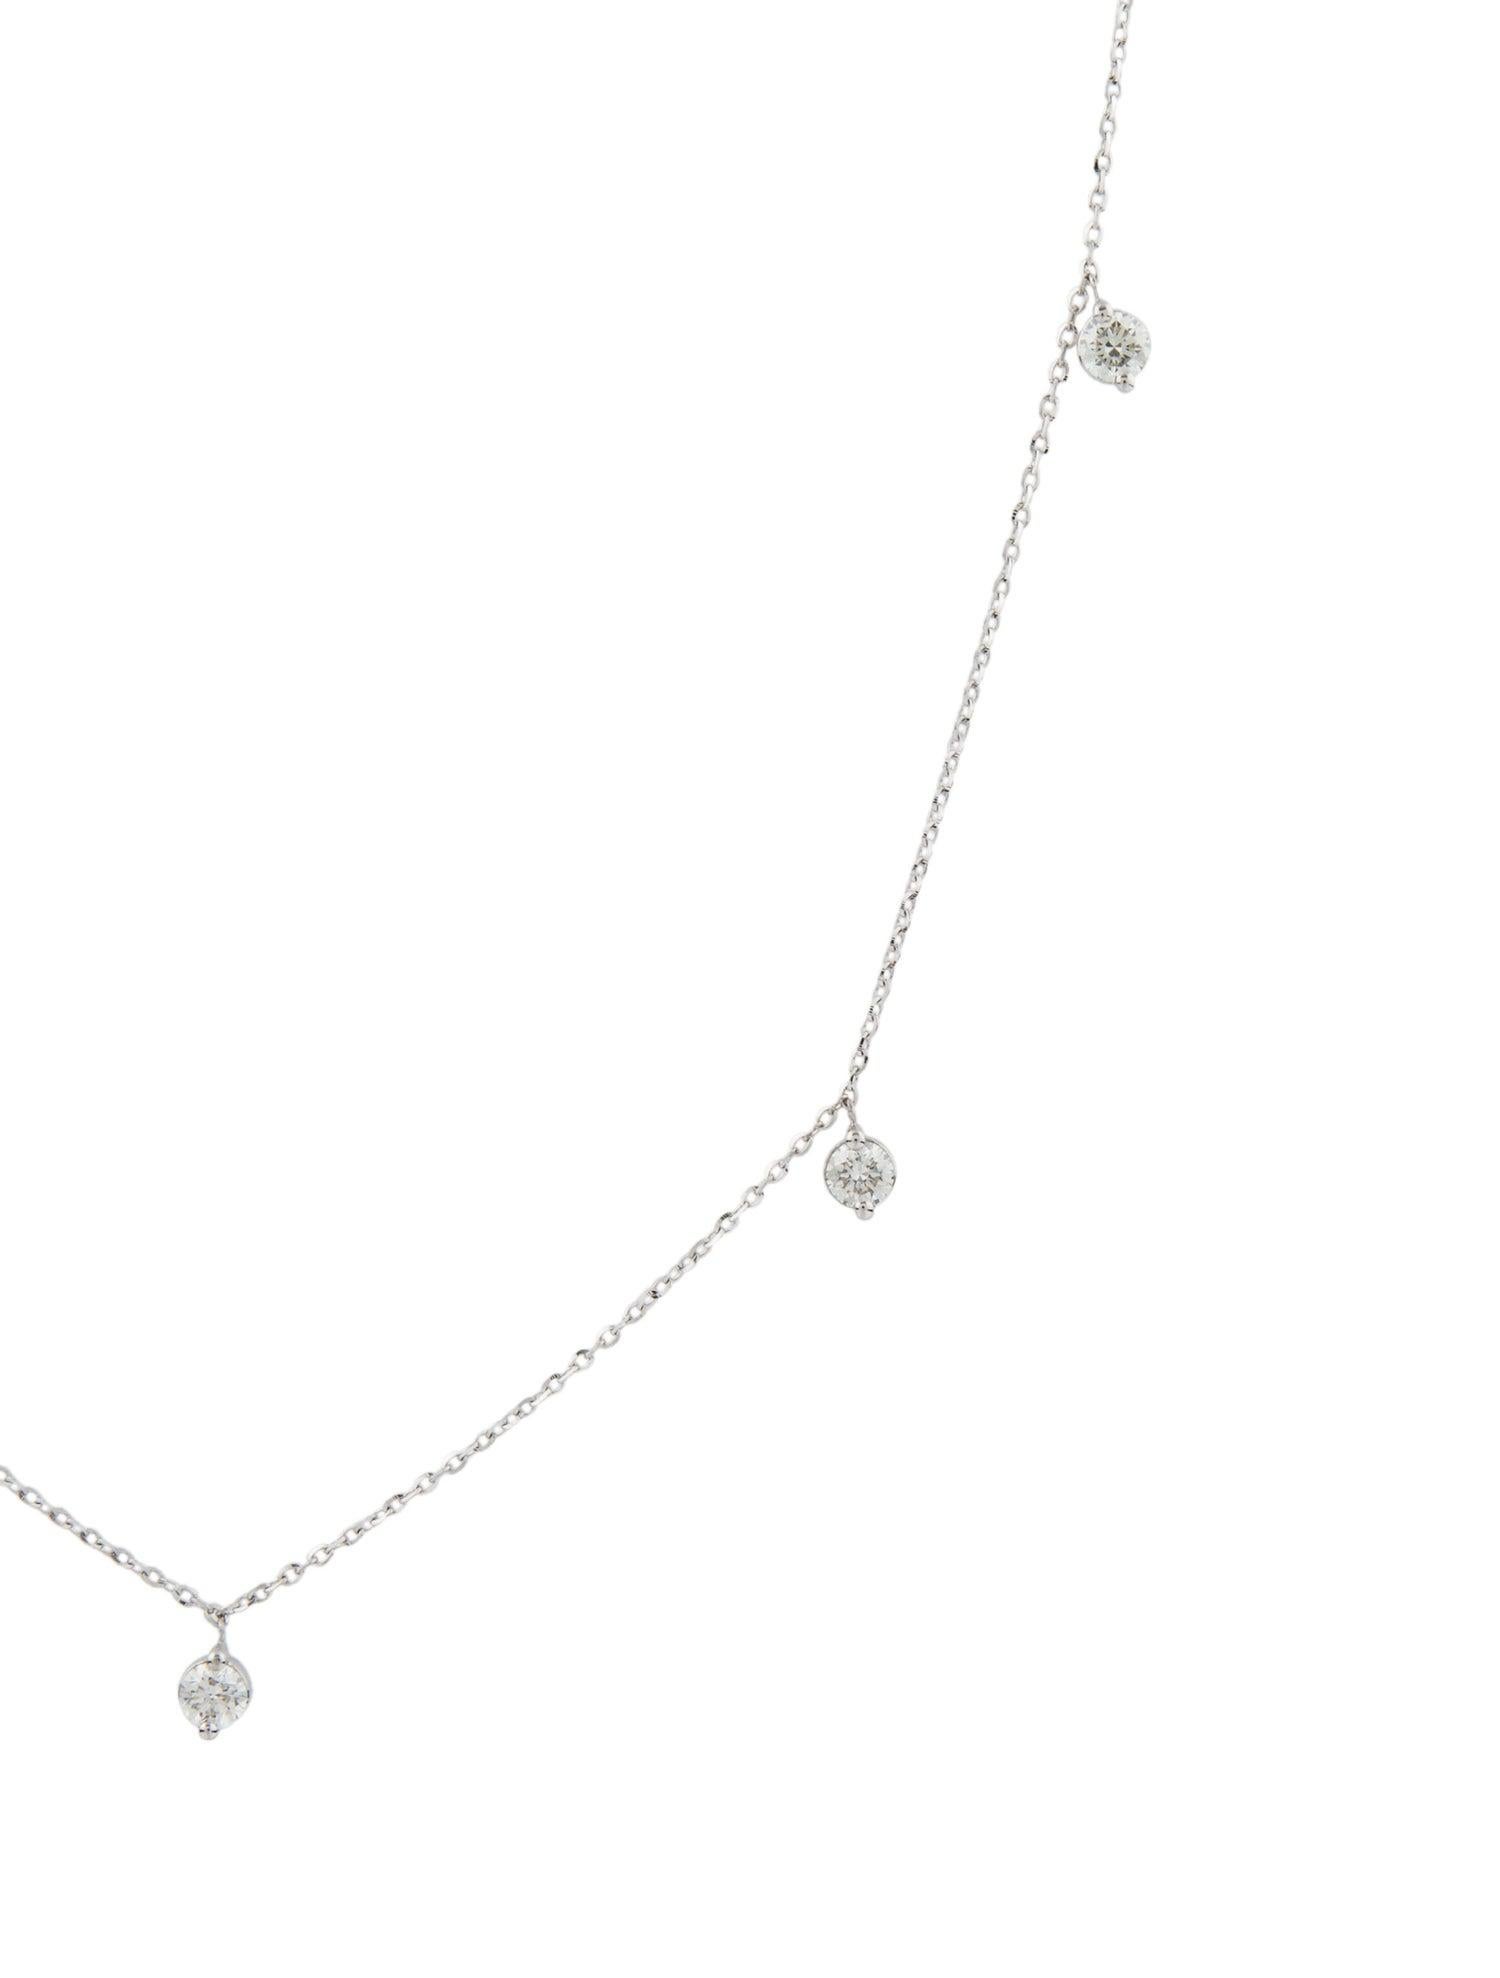 Round Cut 14K White Gold 0.79 Carat Diamond Station Necklace For Sale